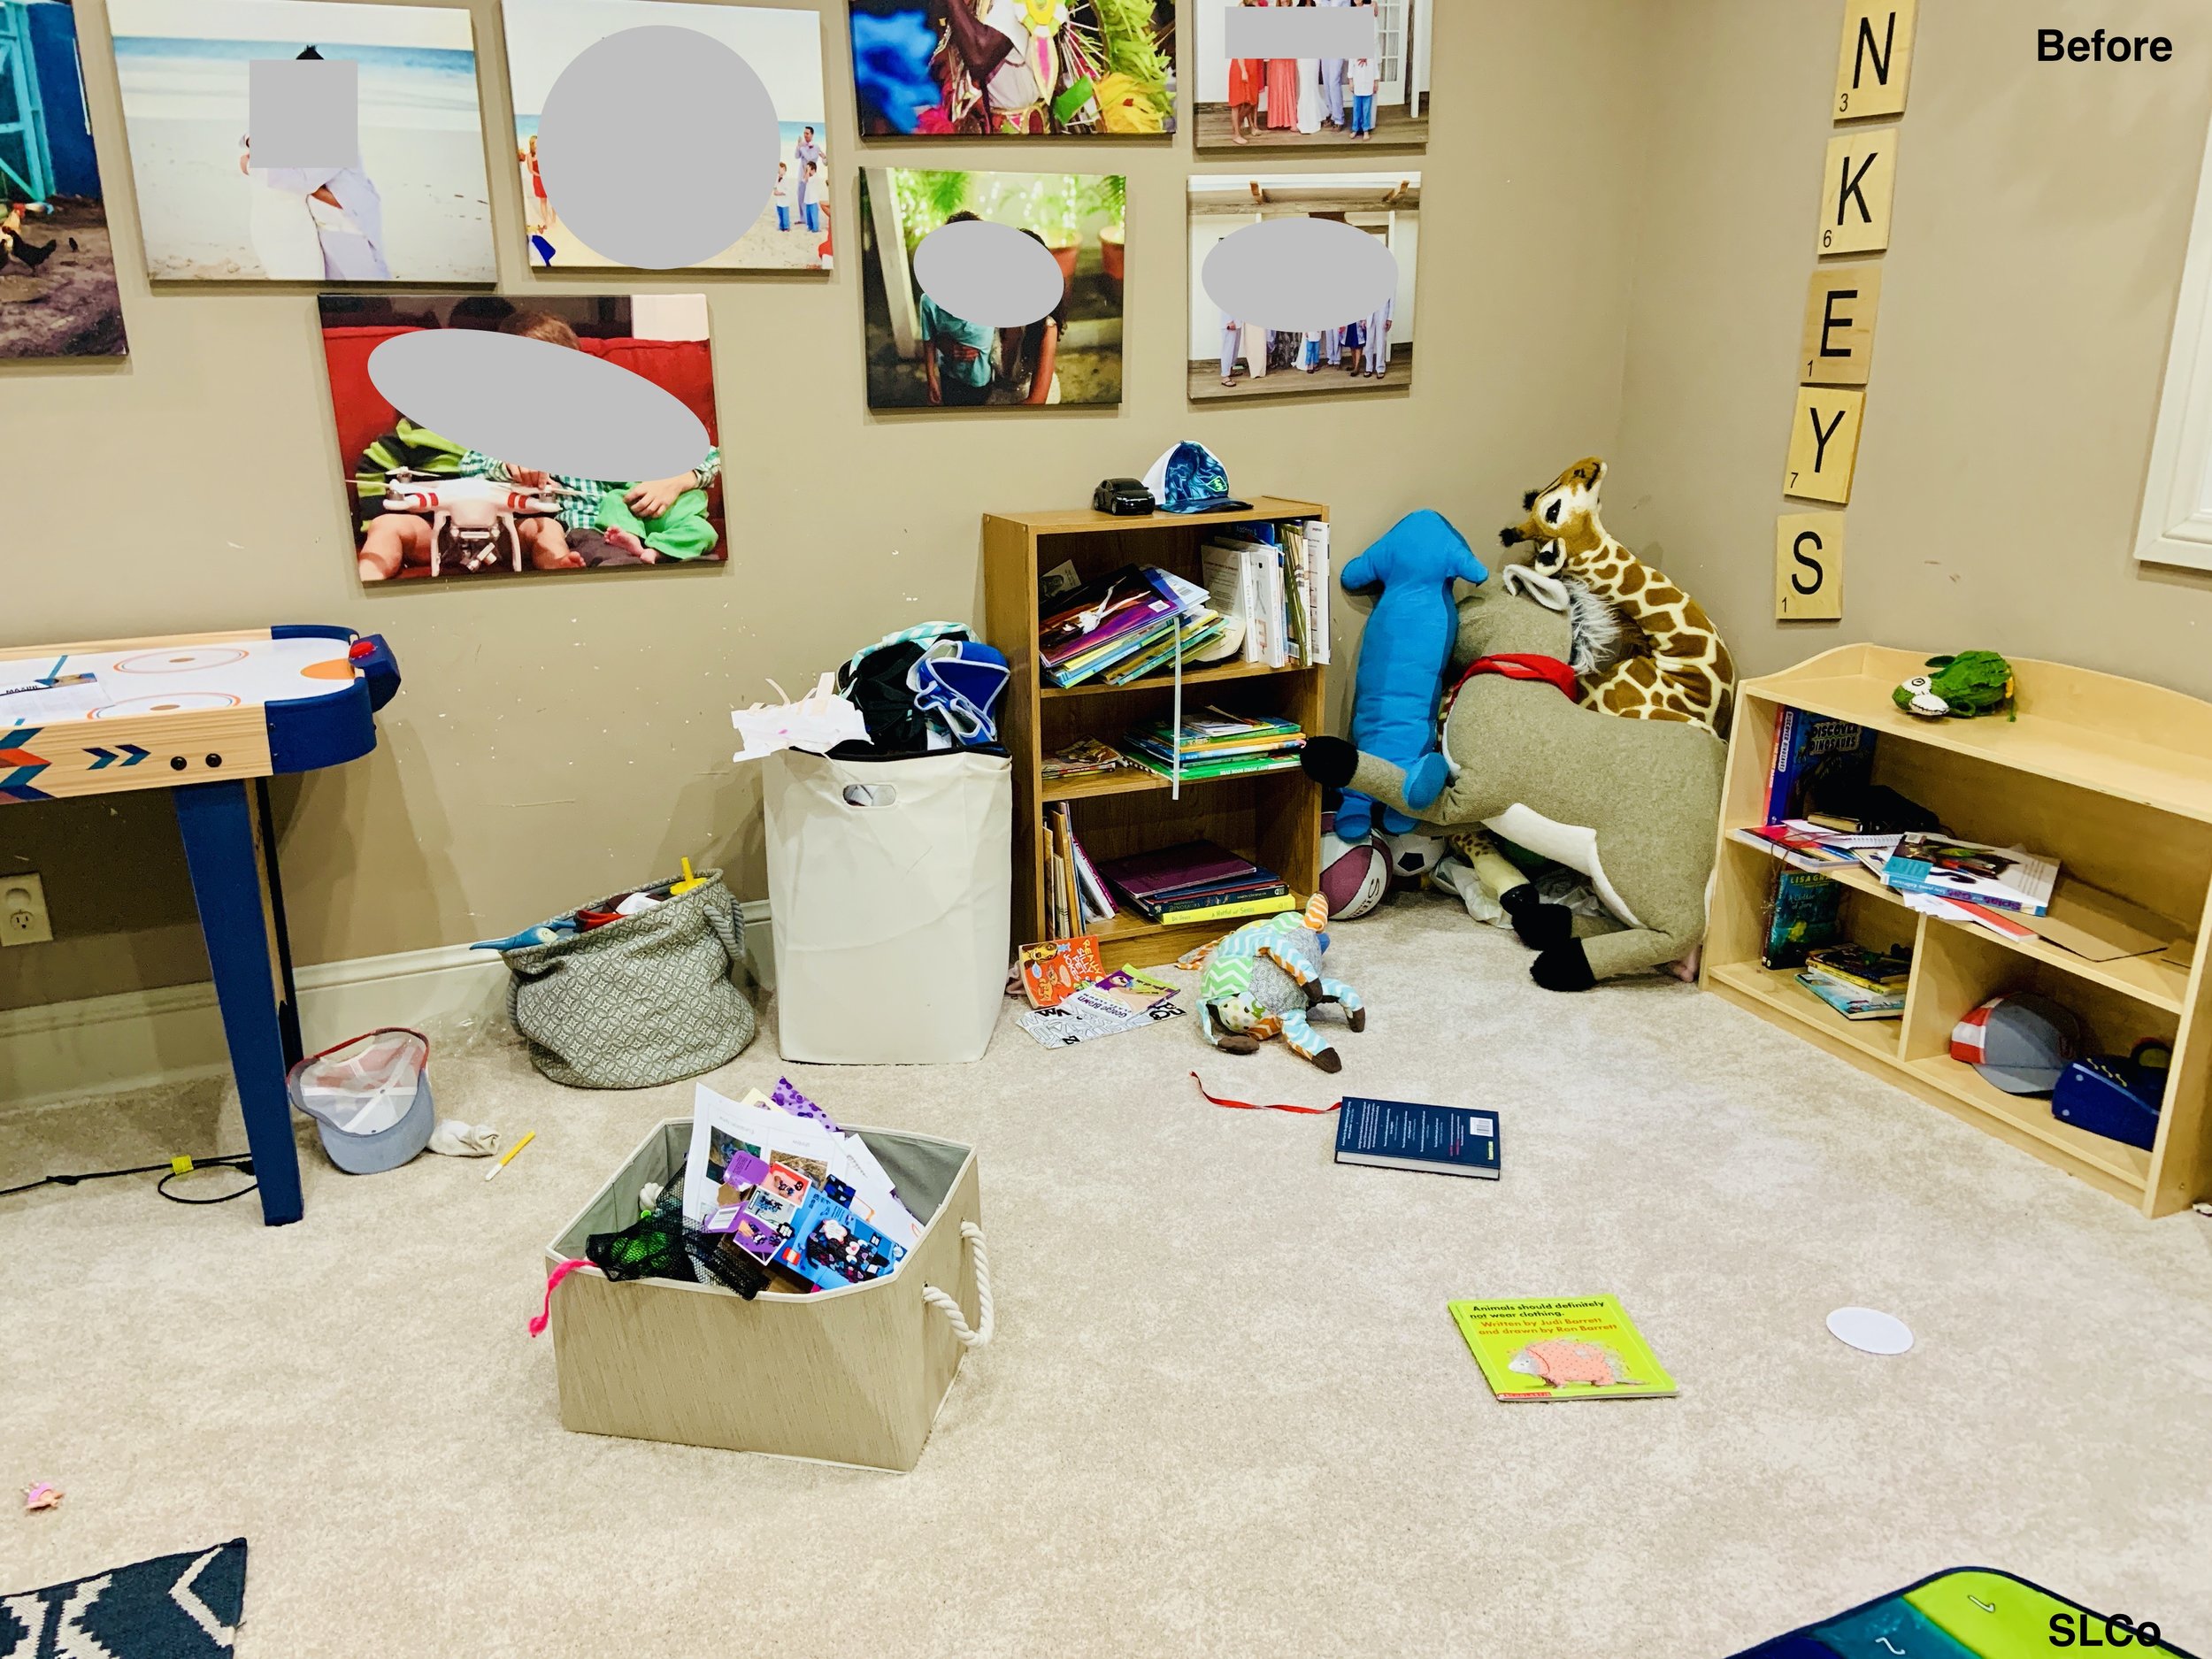 Before photo of playroom with toys on the floor and small shelf overflowing with toys, artwork on the walls.